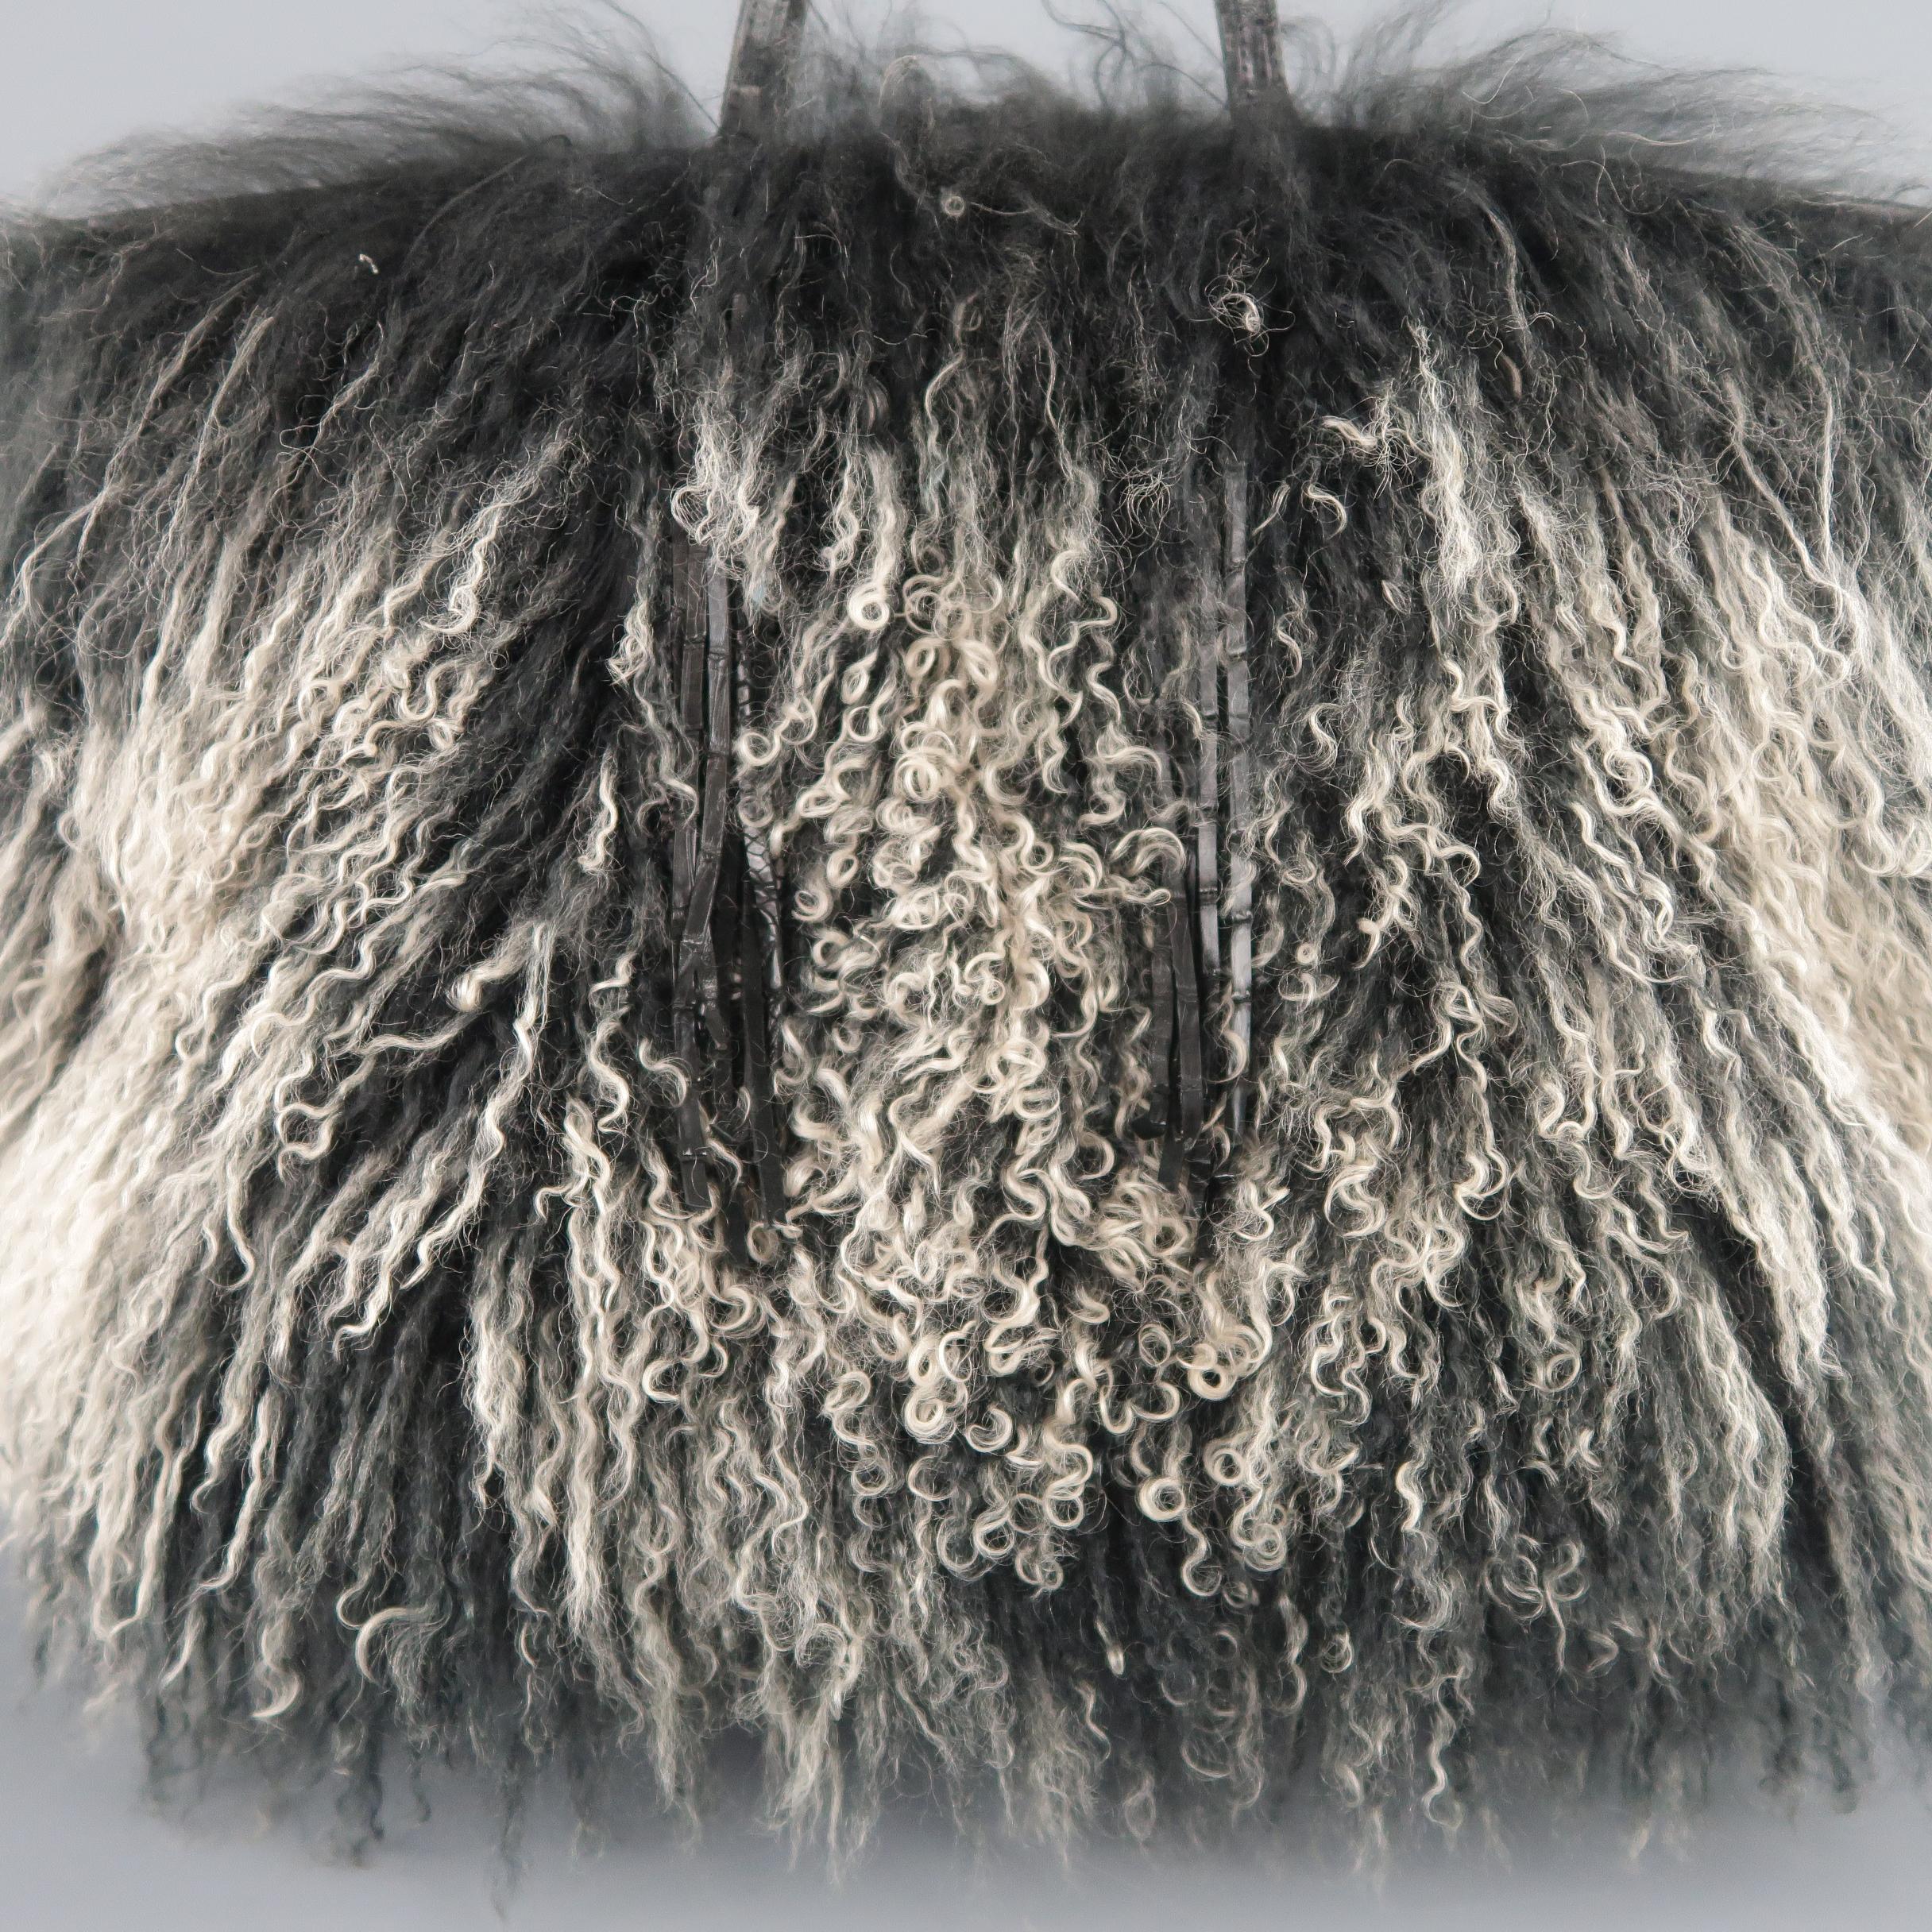 RHONDA OCHS tote bag comes in black to beige ombre Mongolian lamb fur with black alligator handles, fringe, and piping, and suede interior with magnetic closure. Bag appears much larger than measurements taken without length of fur.
 
Very Good